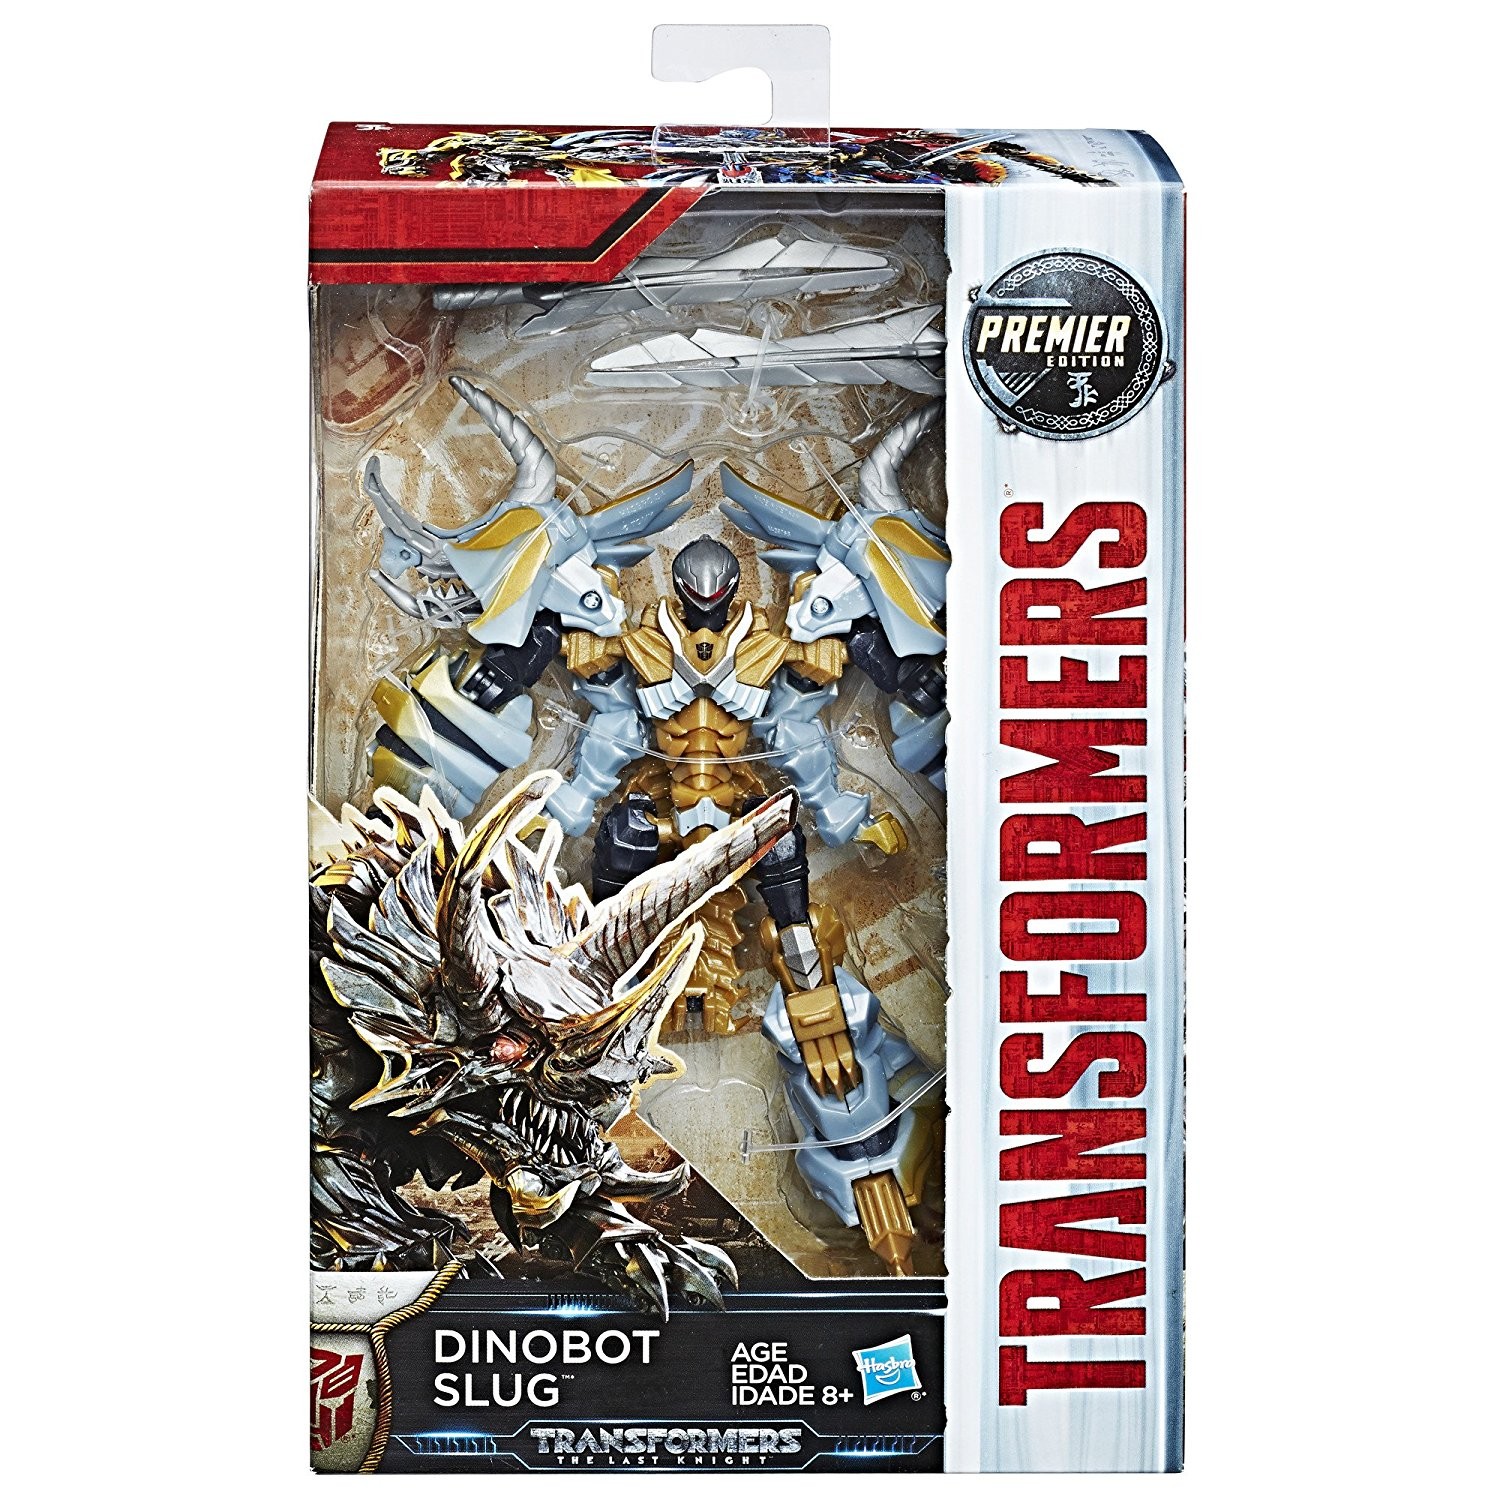 Transformers News: Wave 2 Deluxes and More for Transformers: The Last Knight Toys on Amazon.com